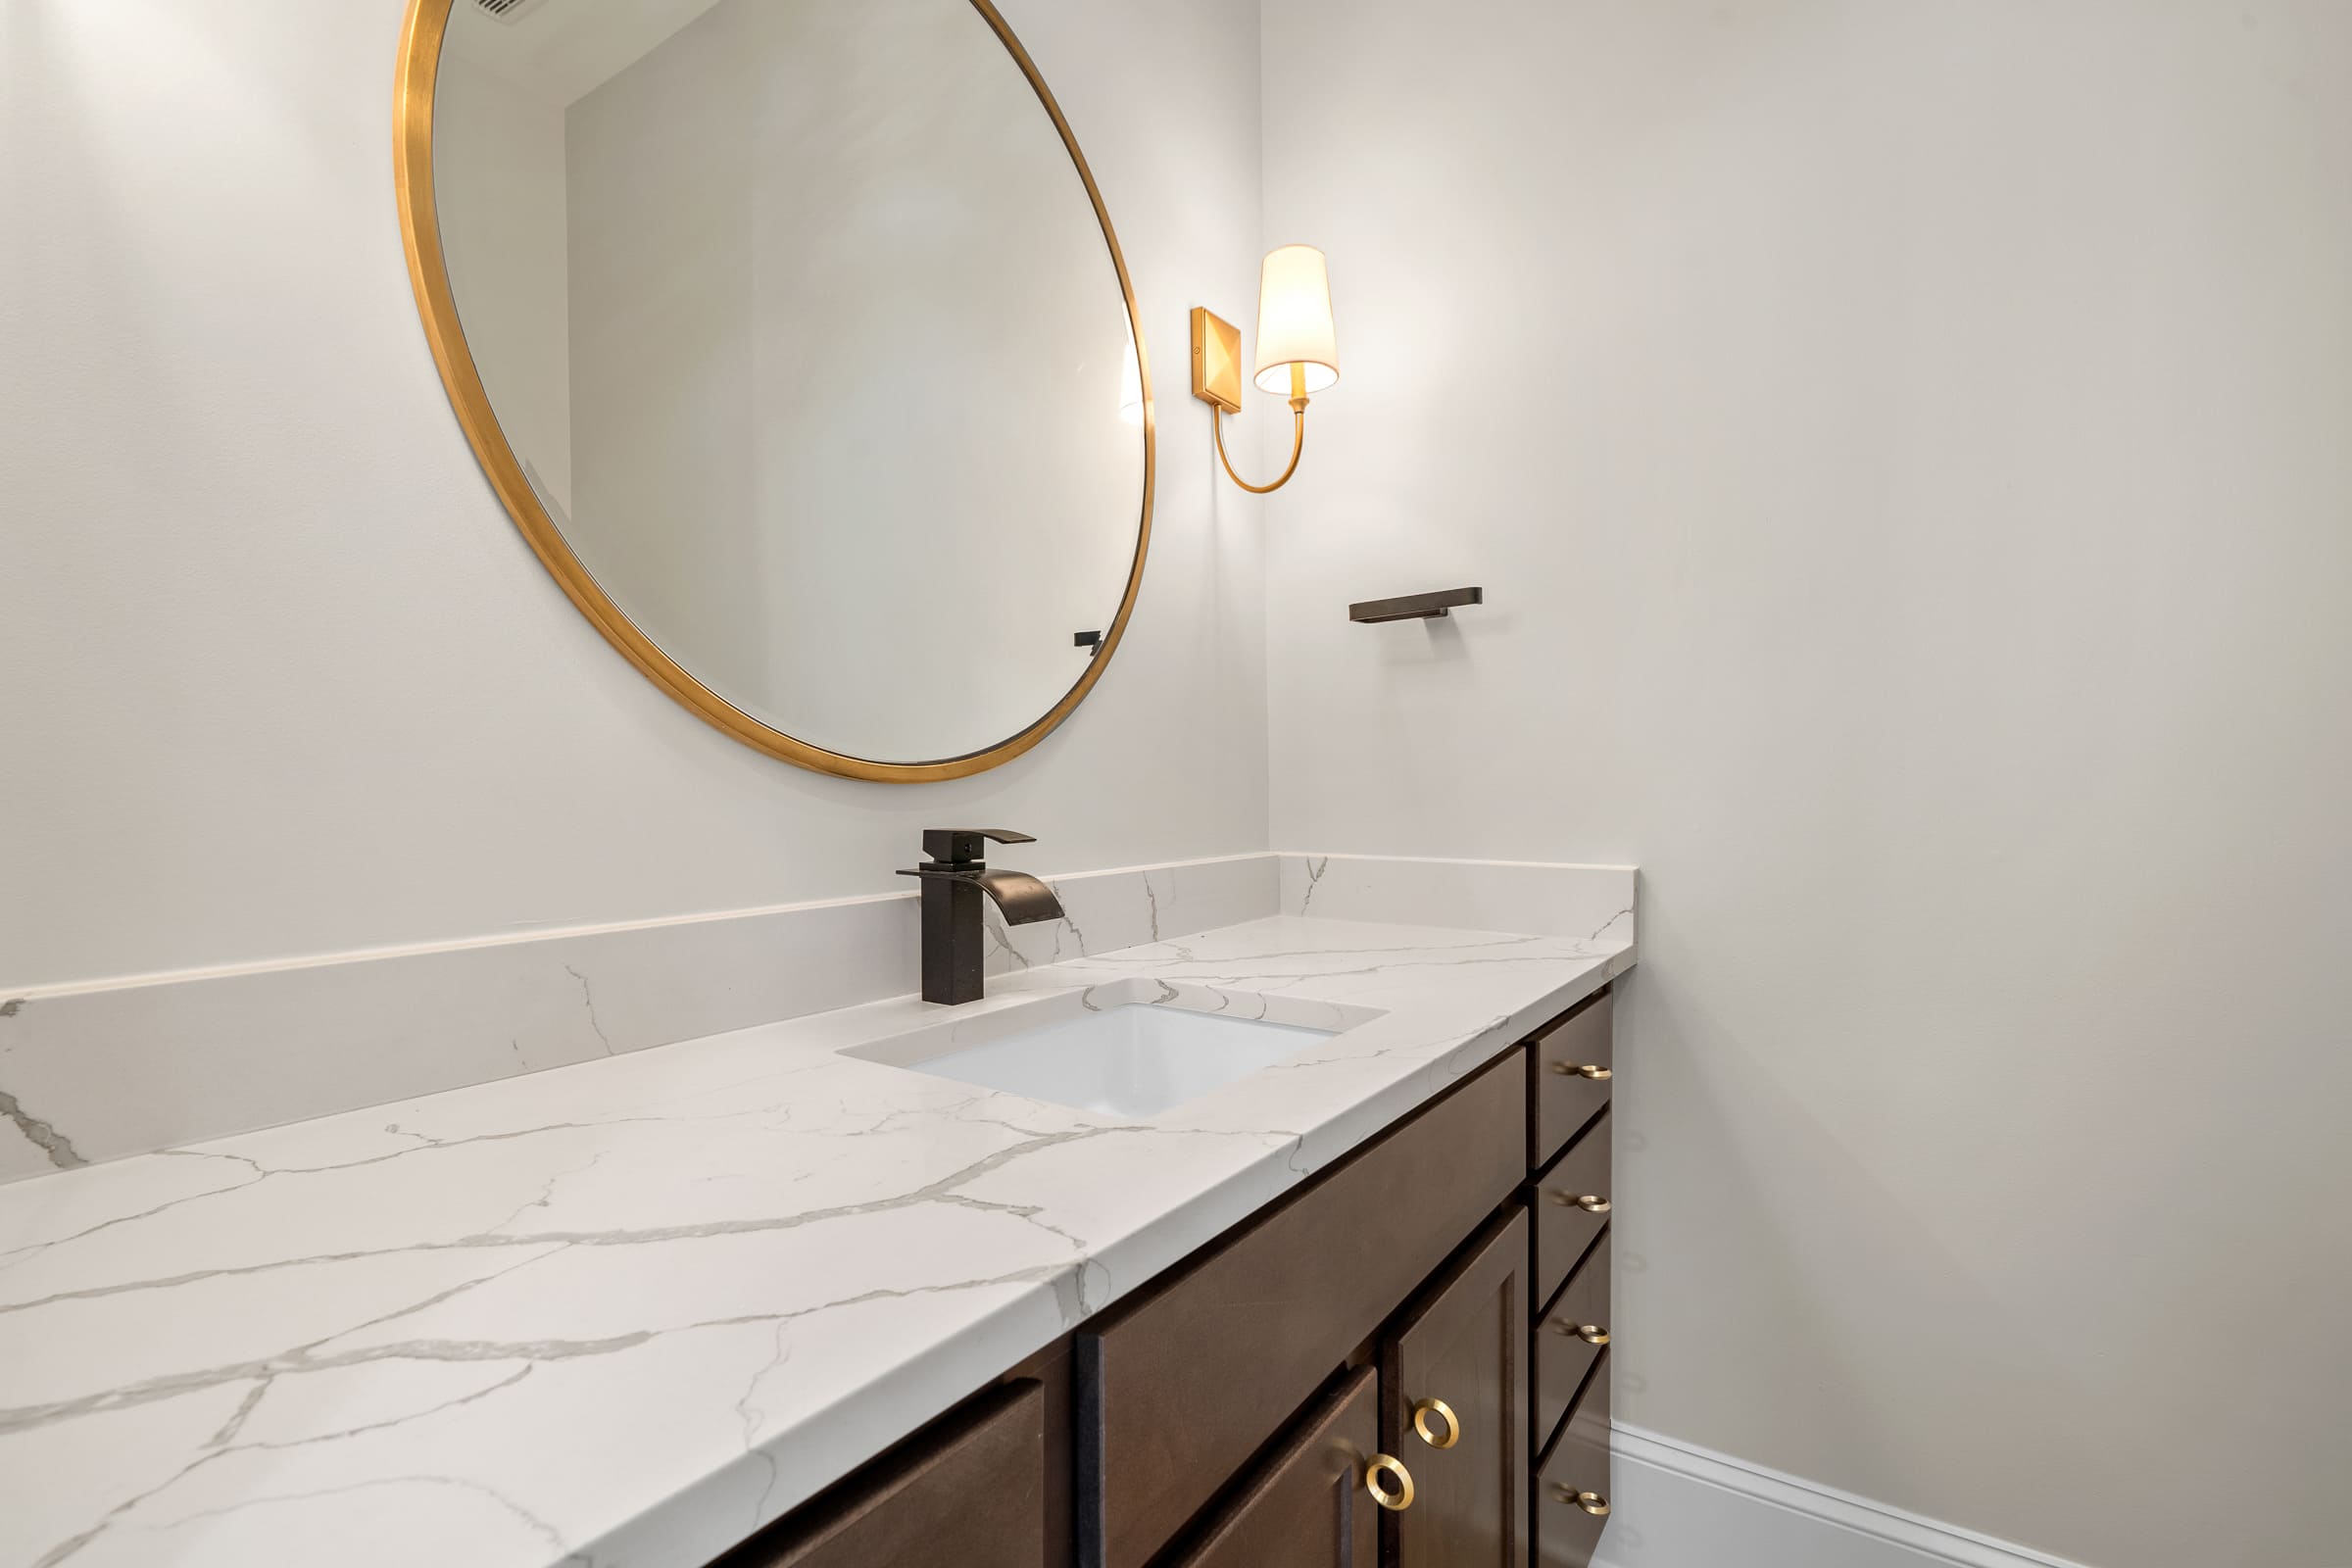 Bathroom with White Marble Coutnertop and Dark Wood Cabinets with Gold Accents |PAXISgroup